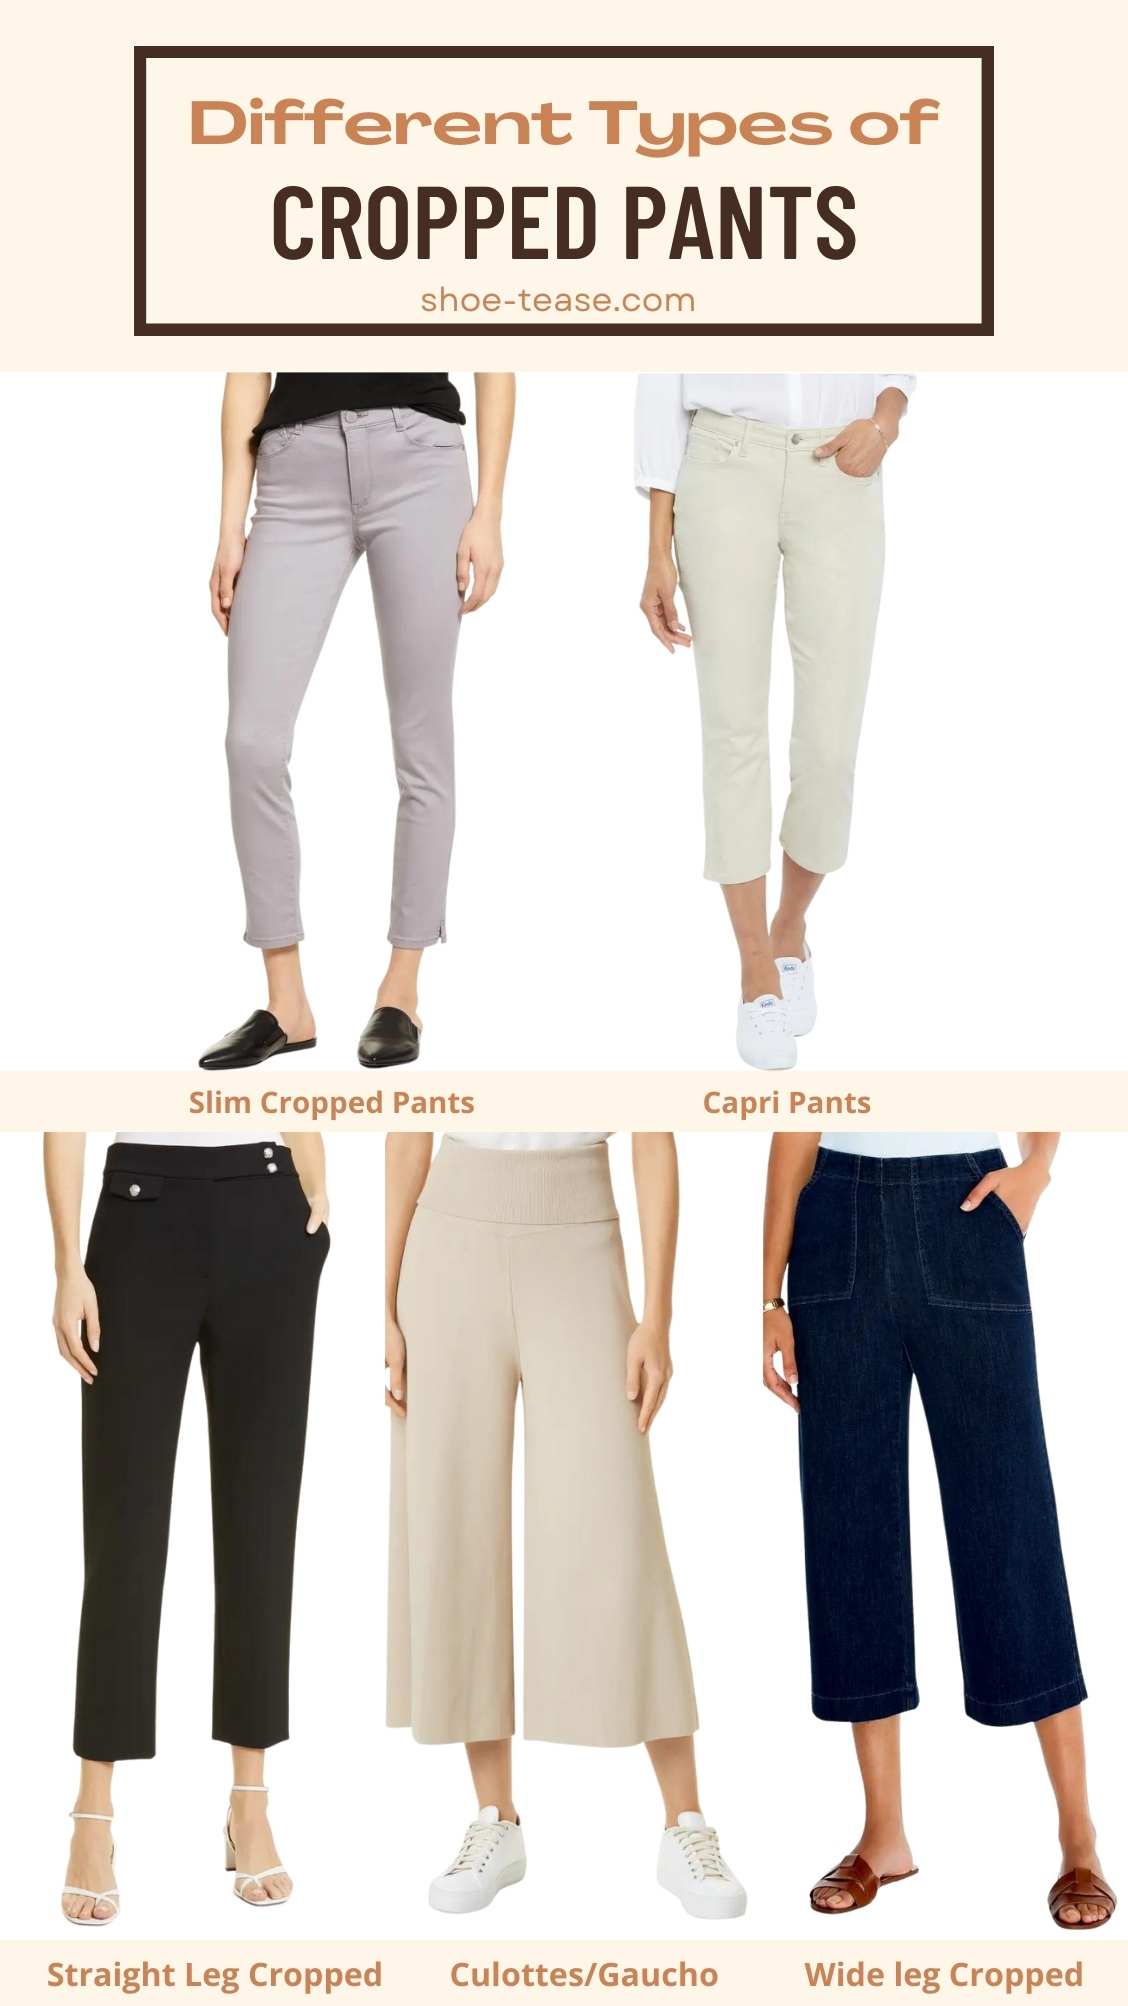 Plus Size High-Waist Tailored Ankle Pant | Talbots